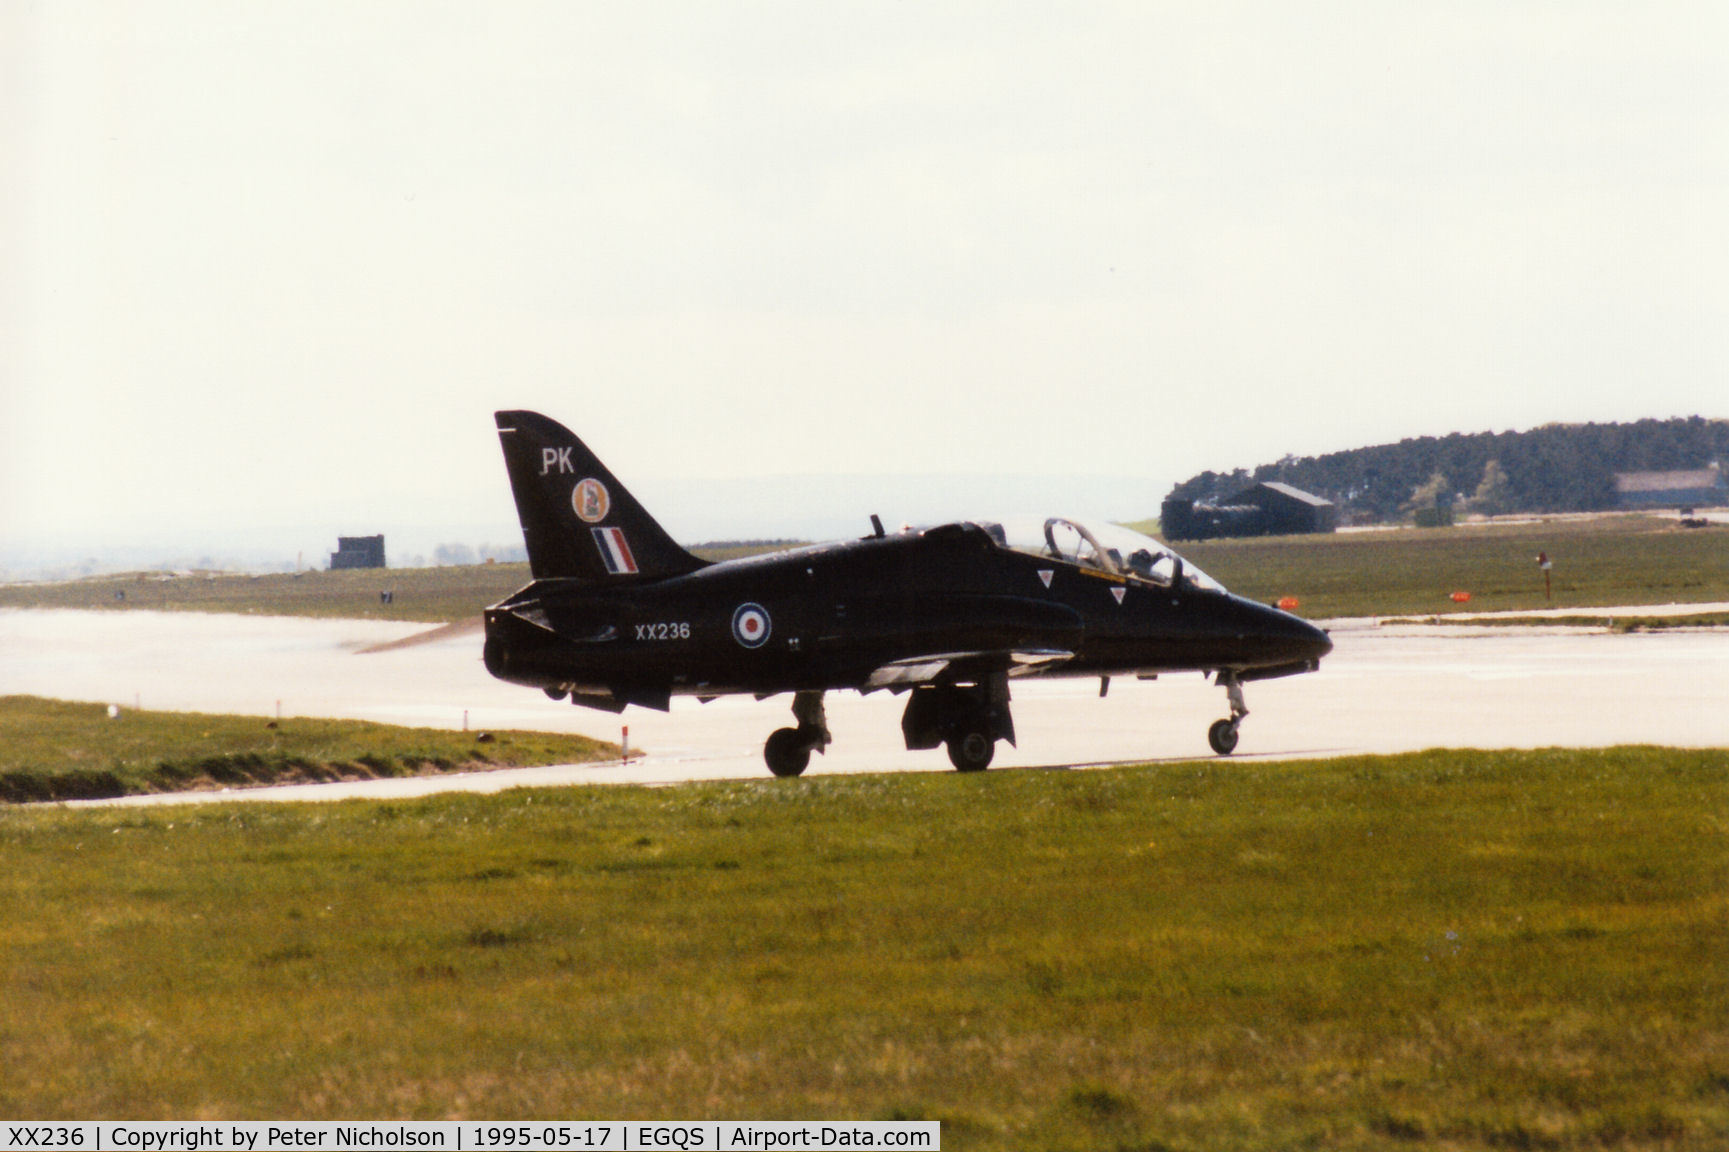 XX236, 1978 Hawker Siddeley Hawk T.1 C/N 072/312072, Hawk T.1 of 19[Reserve] Squadron crossing the active runway at RAF Lossiemouth in the Summer of 1995.